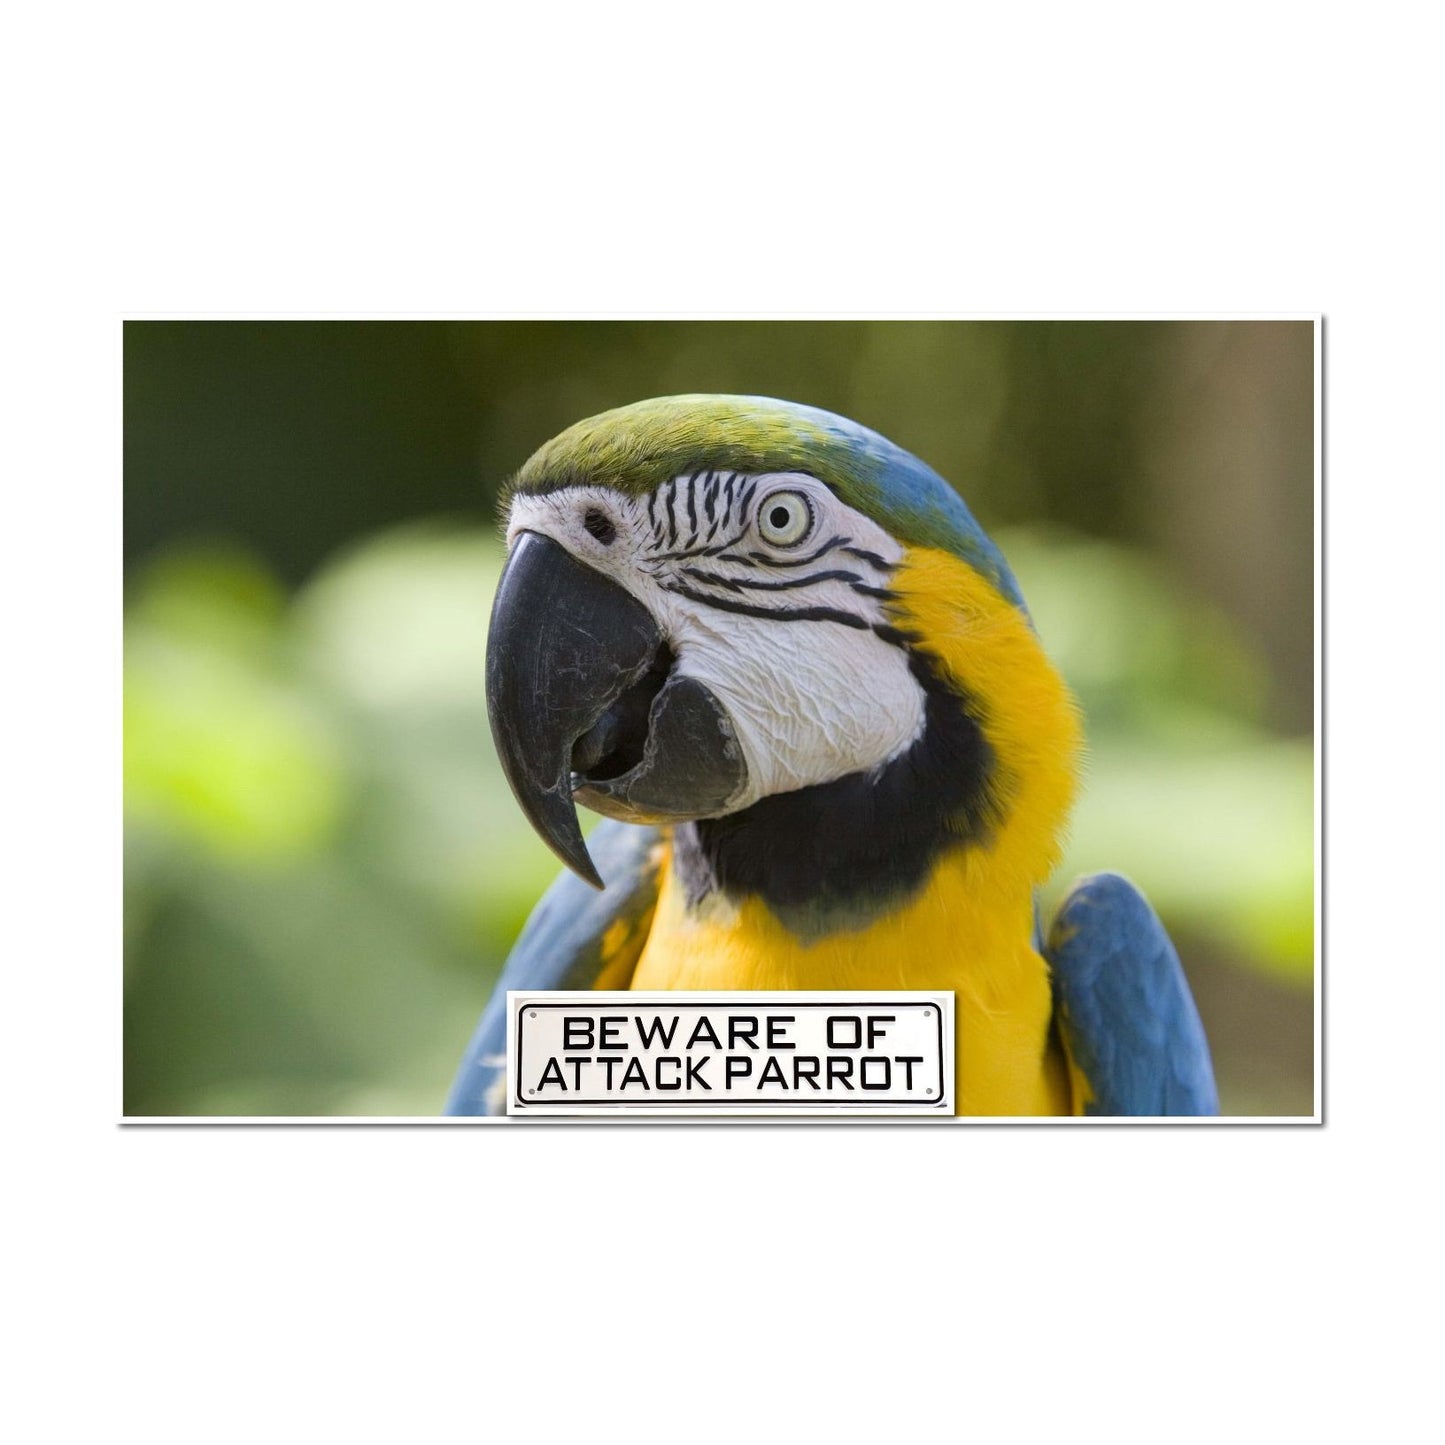 Beware Of Attack Parrot Sign Solid Plastic 12 X 3